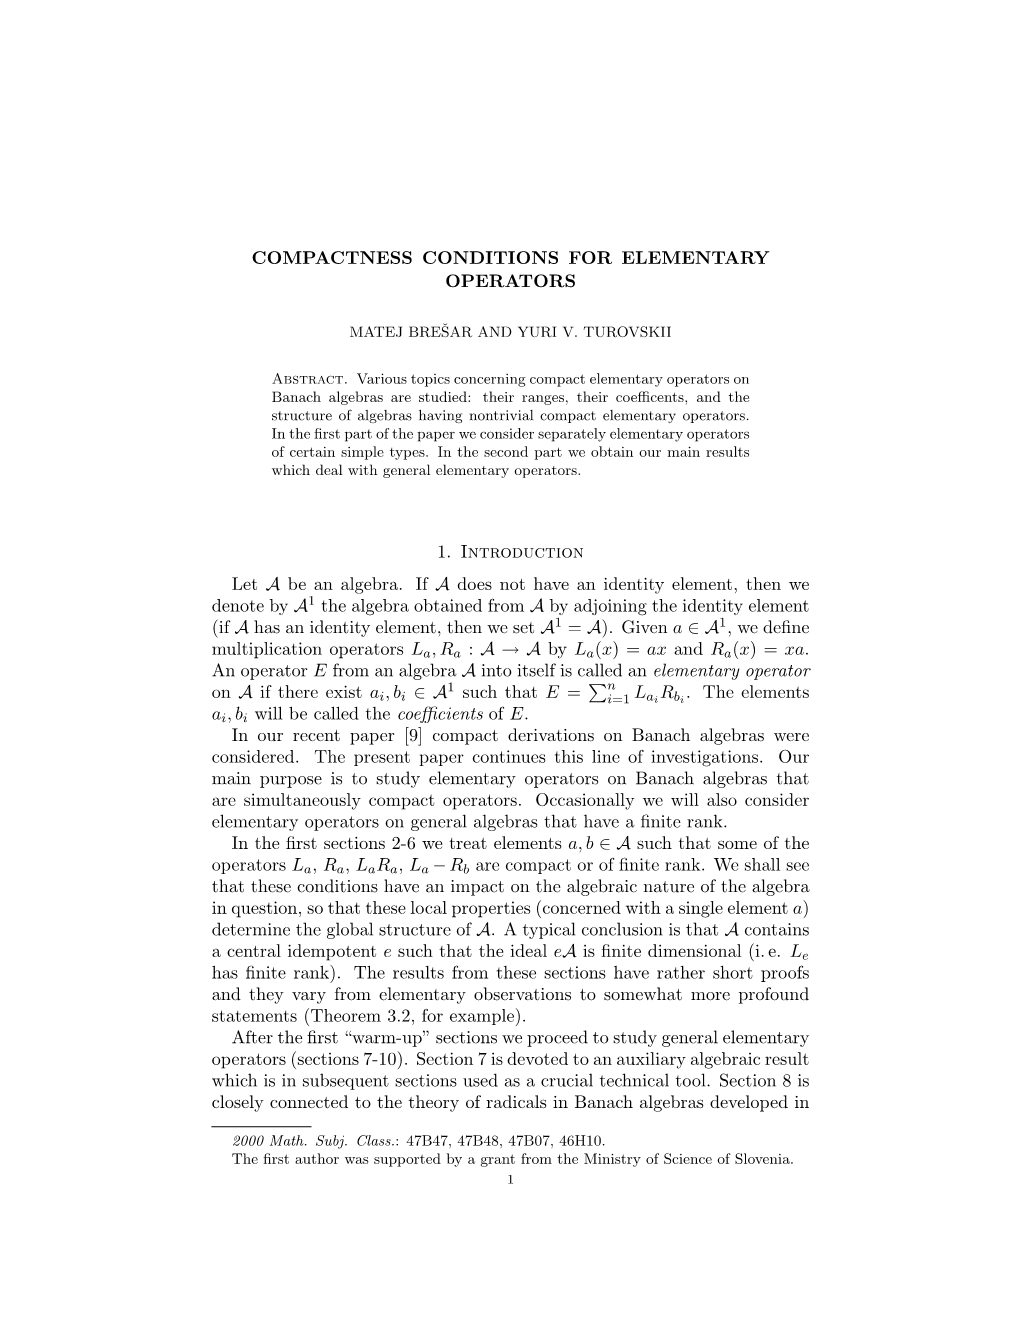 Compactness Conditions for Elementary Operators 11